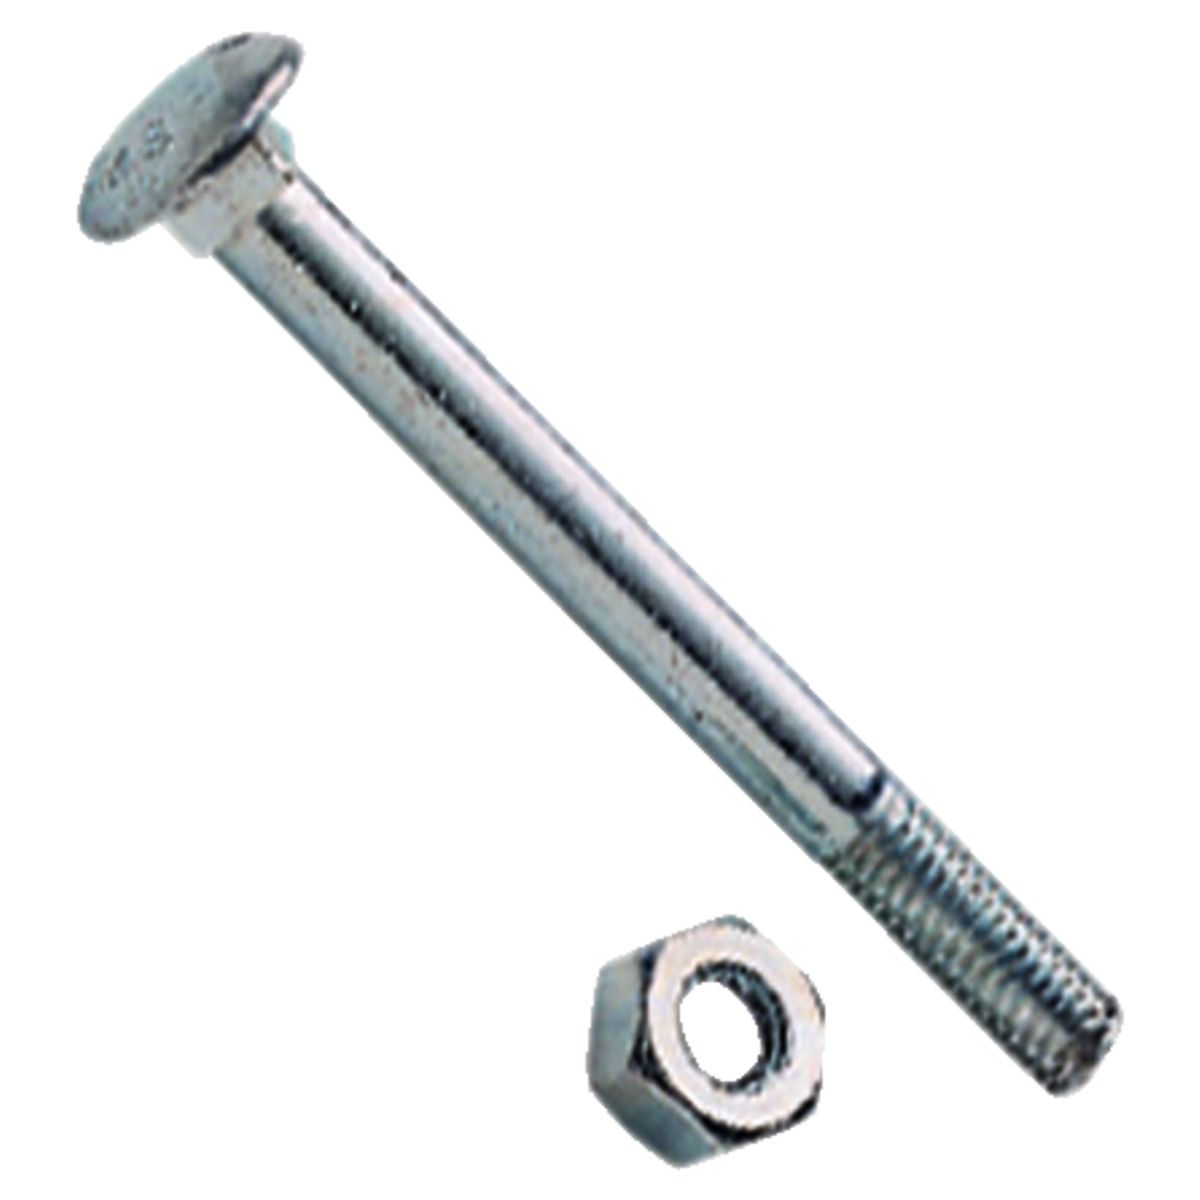 Image of Wickes Carriage Bolt Nut & Washer - M8 x 65mm Pack of 6